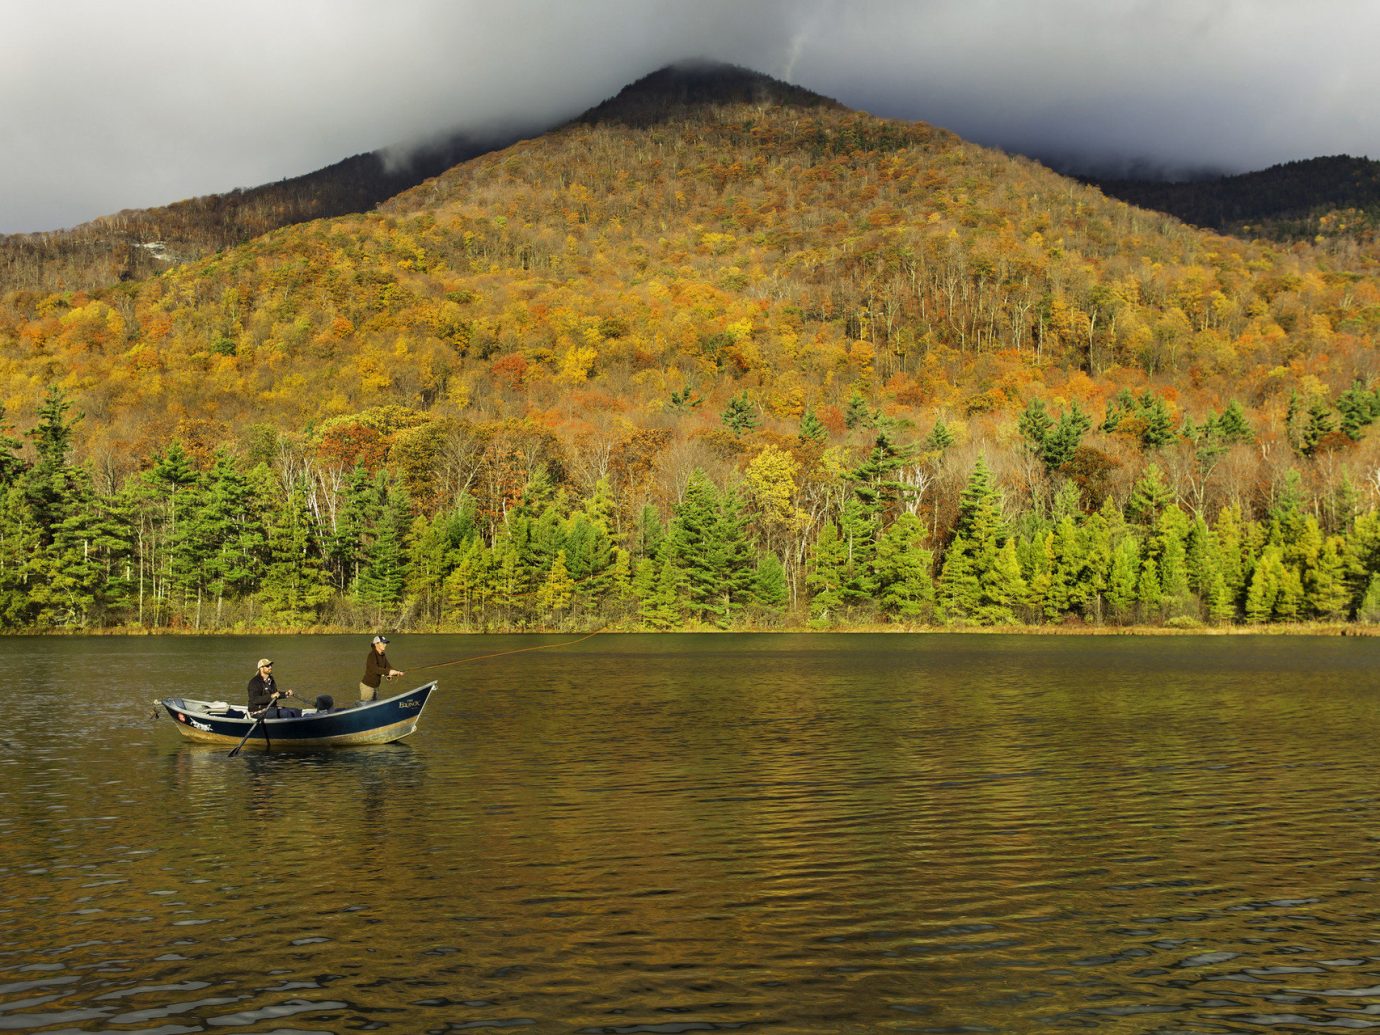 autumn Boat clouds cloudy Fall Greenery hills Hotels isolation Lake Luxury Travel Mountains Nature Outdoor Activities Outdoors people remote River row boats rowers Rowing trees water outdoor sky mountain wilderness tree reflection loch morning leaf background landscape reservoir boating surrounded distance